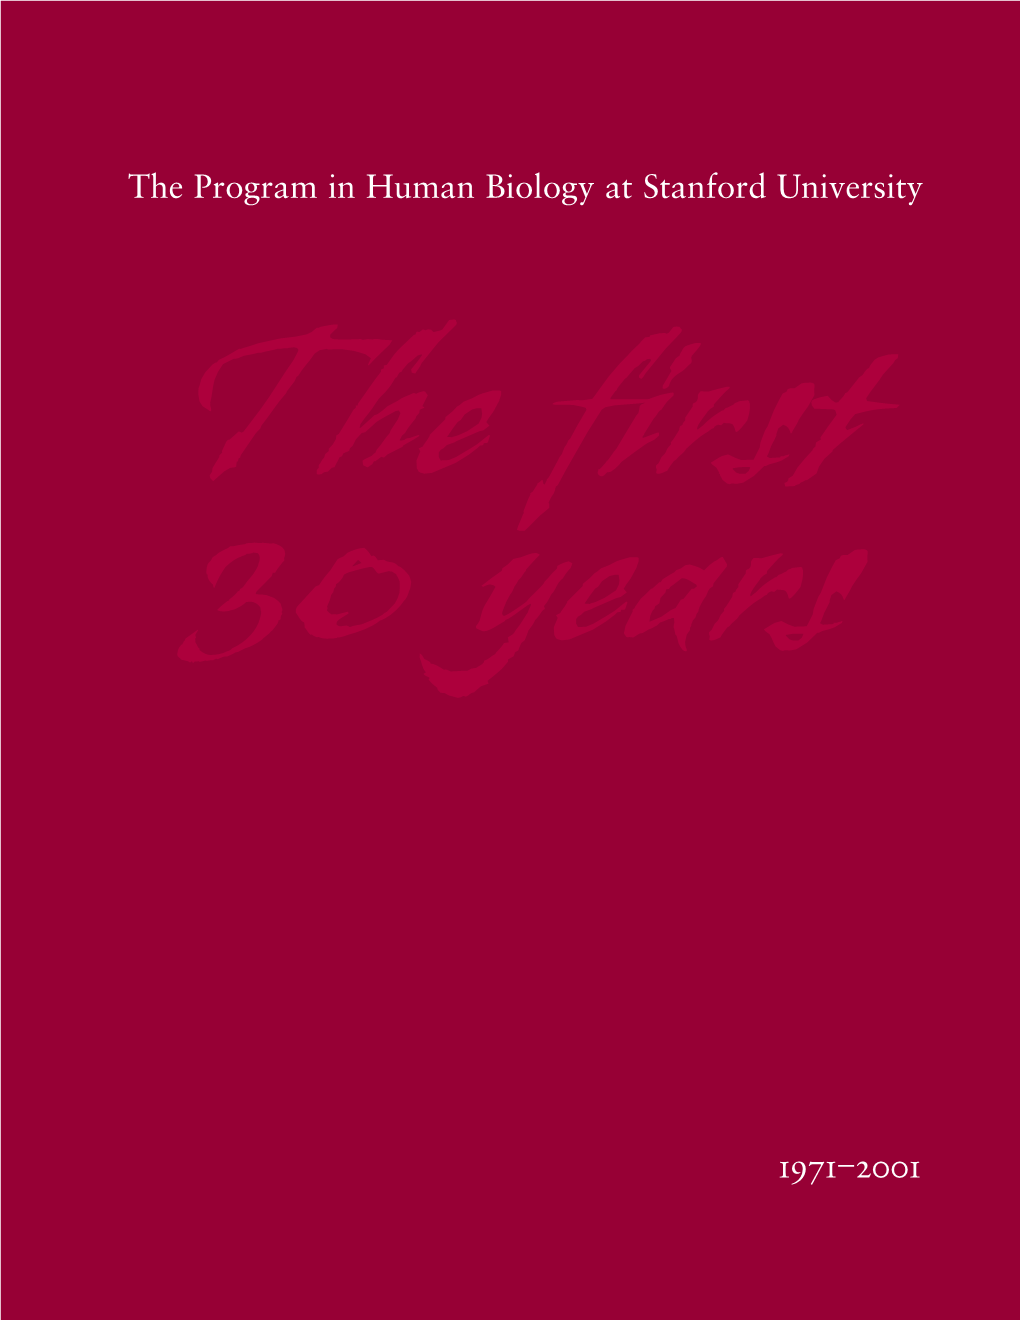 The Program in Human Biology at Stanford University the First 30 Years